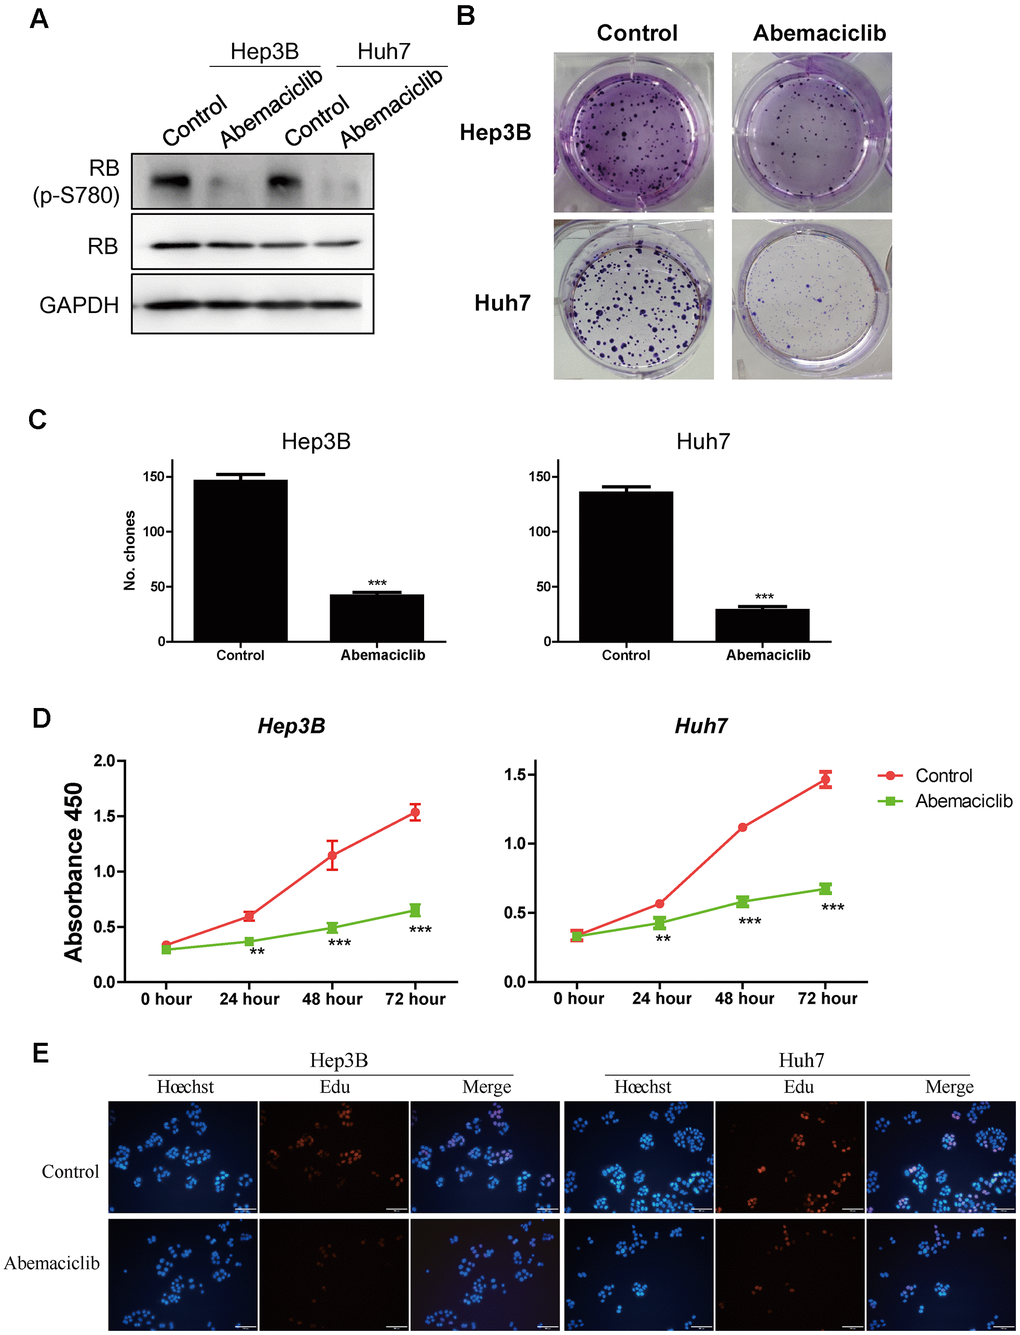 Abemaciclib substantially inhibited the proliferation of HCC cells in vitro. (A) The protein levels of retinoblastoma (p-S780) and retinoblastoma in Hep3B and Huh7 cells. (B, C) Clone formation assays were used to detect the effects of abemaciclib on the proliferation of Hep3B and Huh7 cells. (D) A CCK-8 assay was used to analyze cell proliferation in control and abemaciclib-treated Hep3B and Huh7 cells. (E) An Edu assay was used to analyze cell proliferation in control and abemaciclib-treated Hep3B and Huh7 cells. Bar= 100μm; For (C, D), * was compared with Control (**, P 